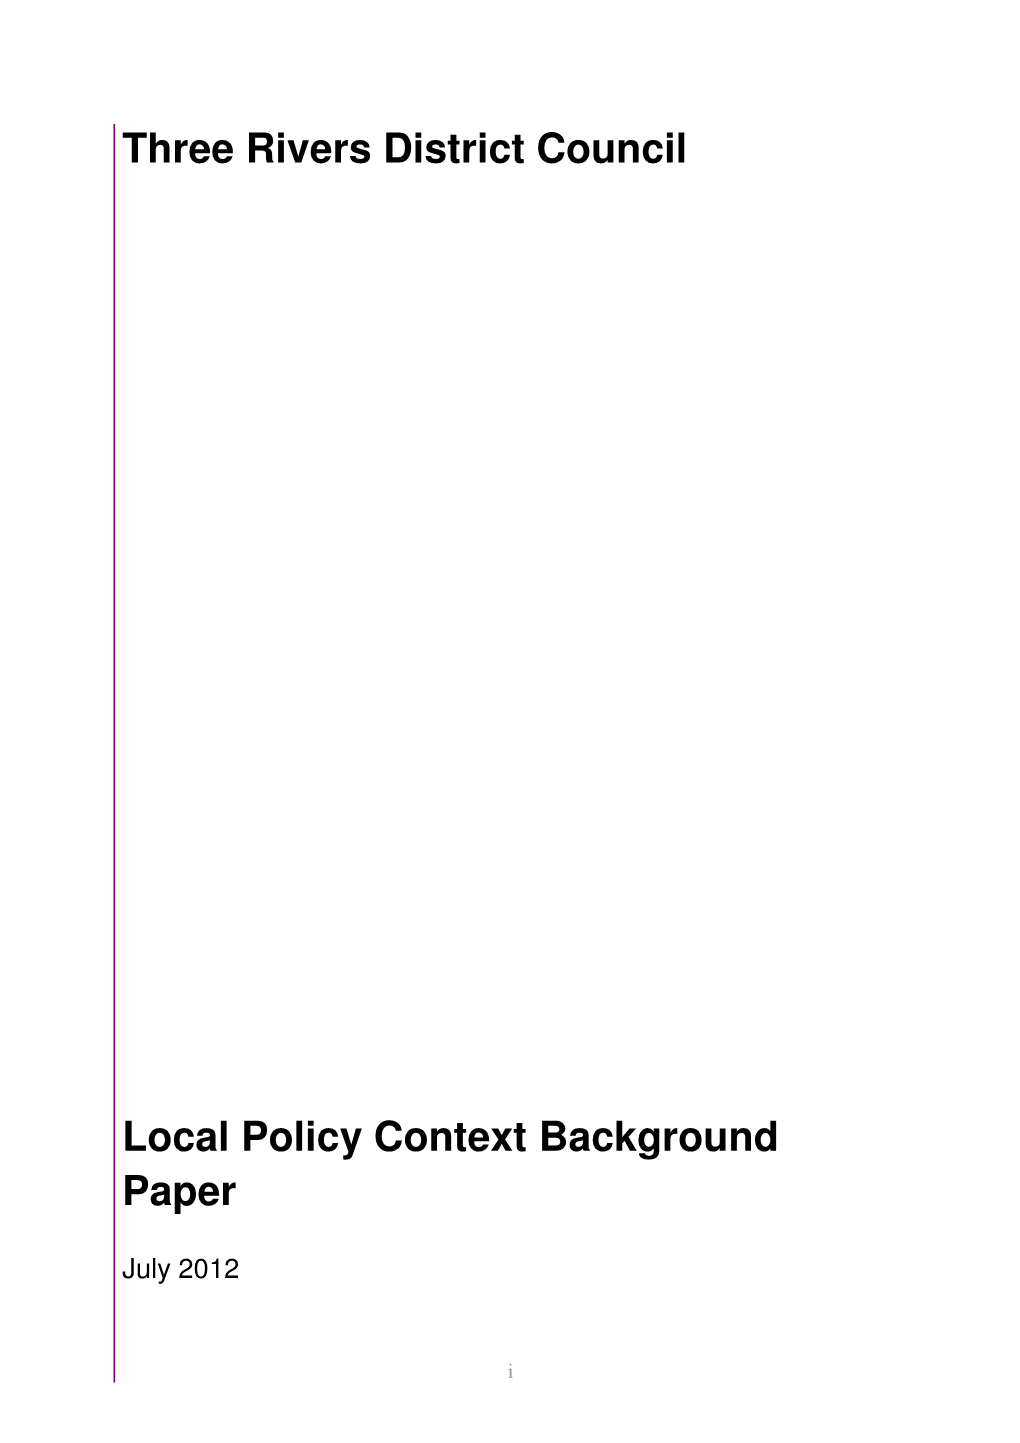 Three Rivers District Council Local Policy Context Background Paper